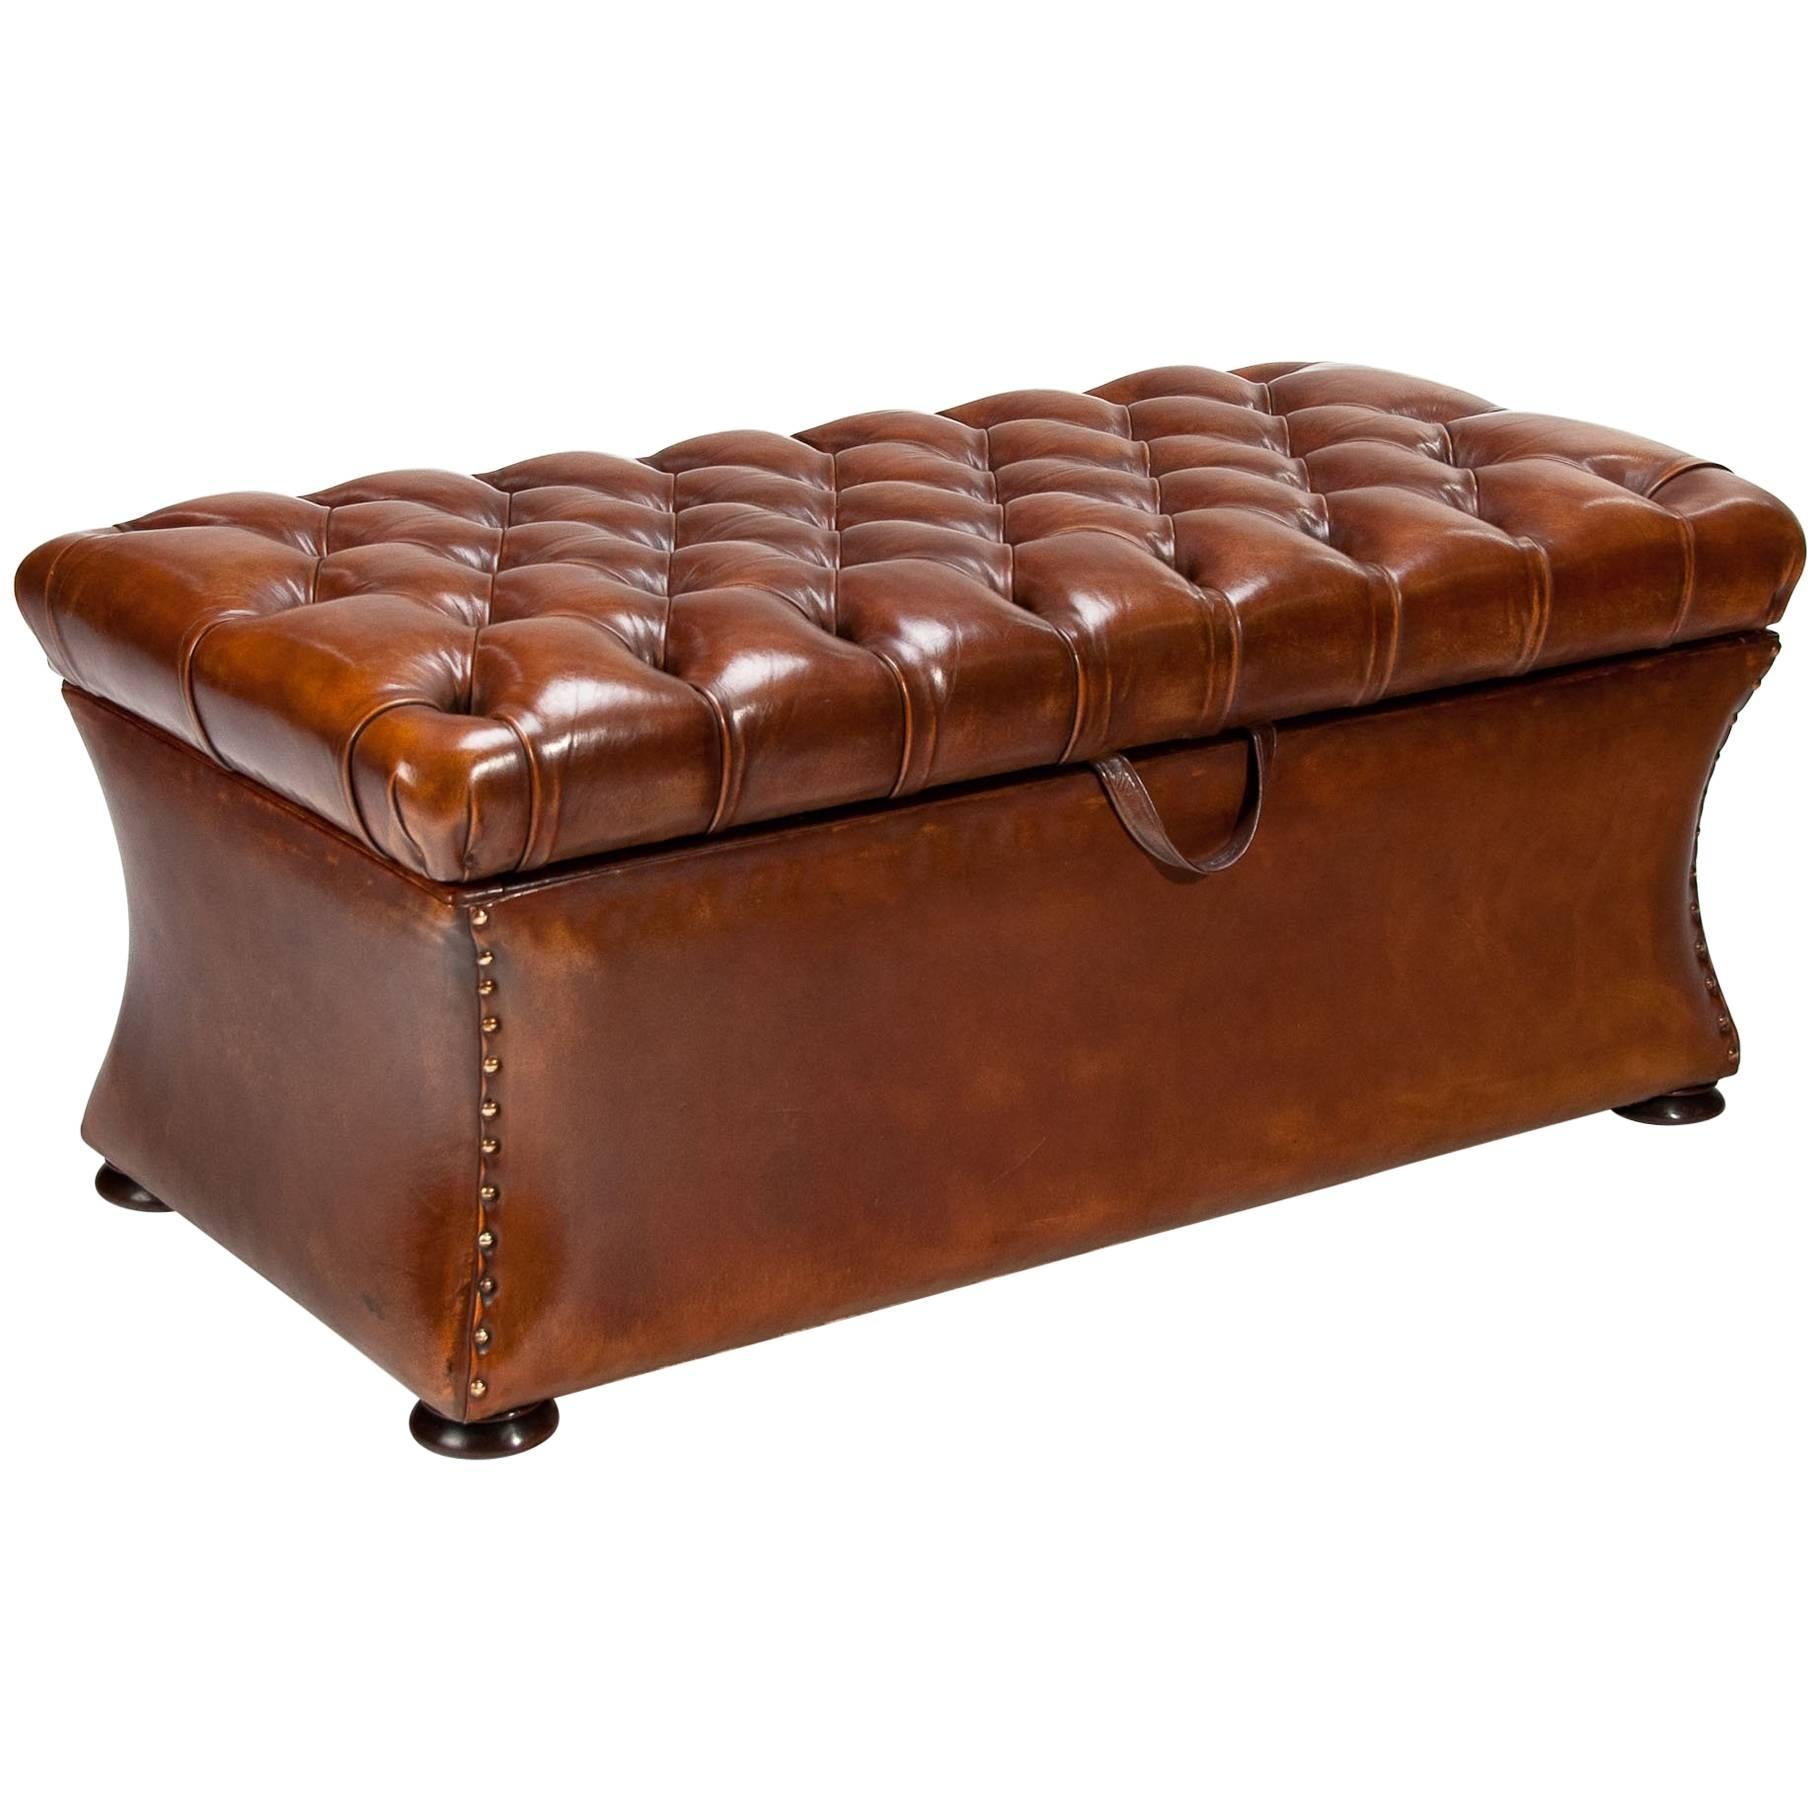 Quality 19th Century Shaped Leather Ottoman